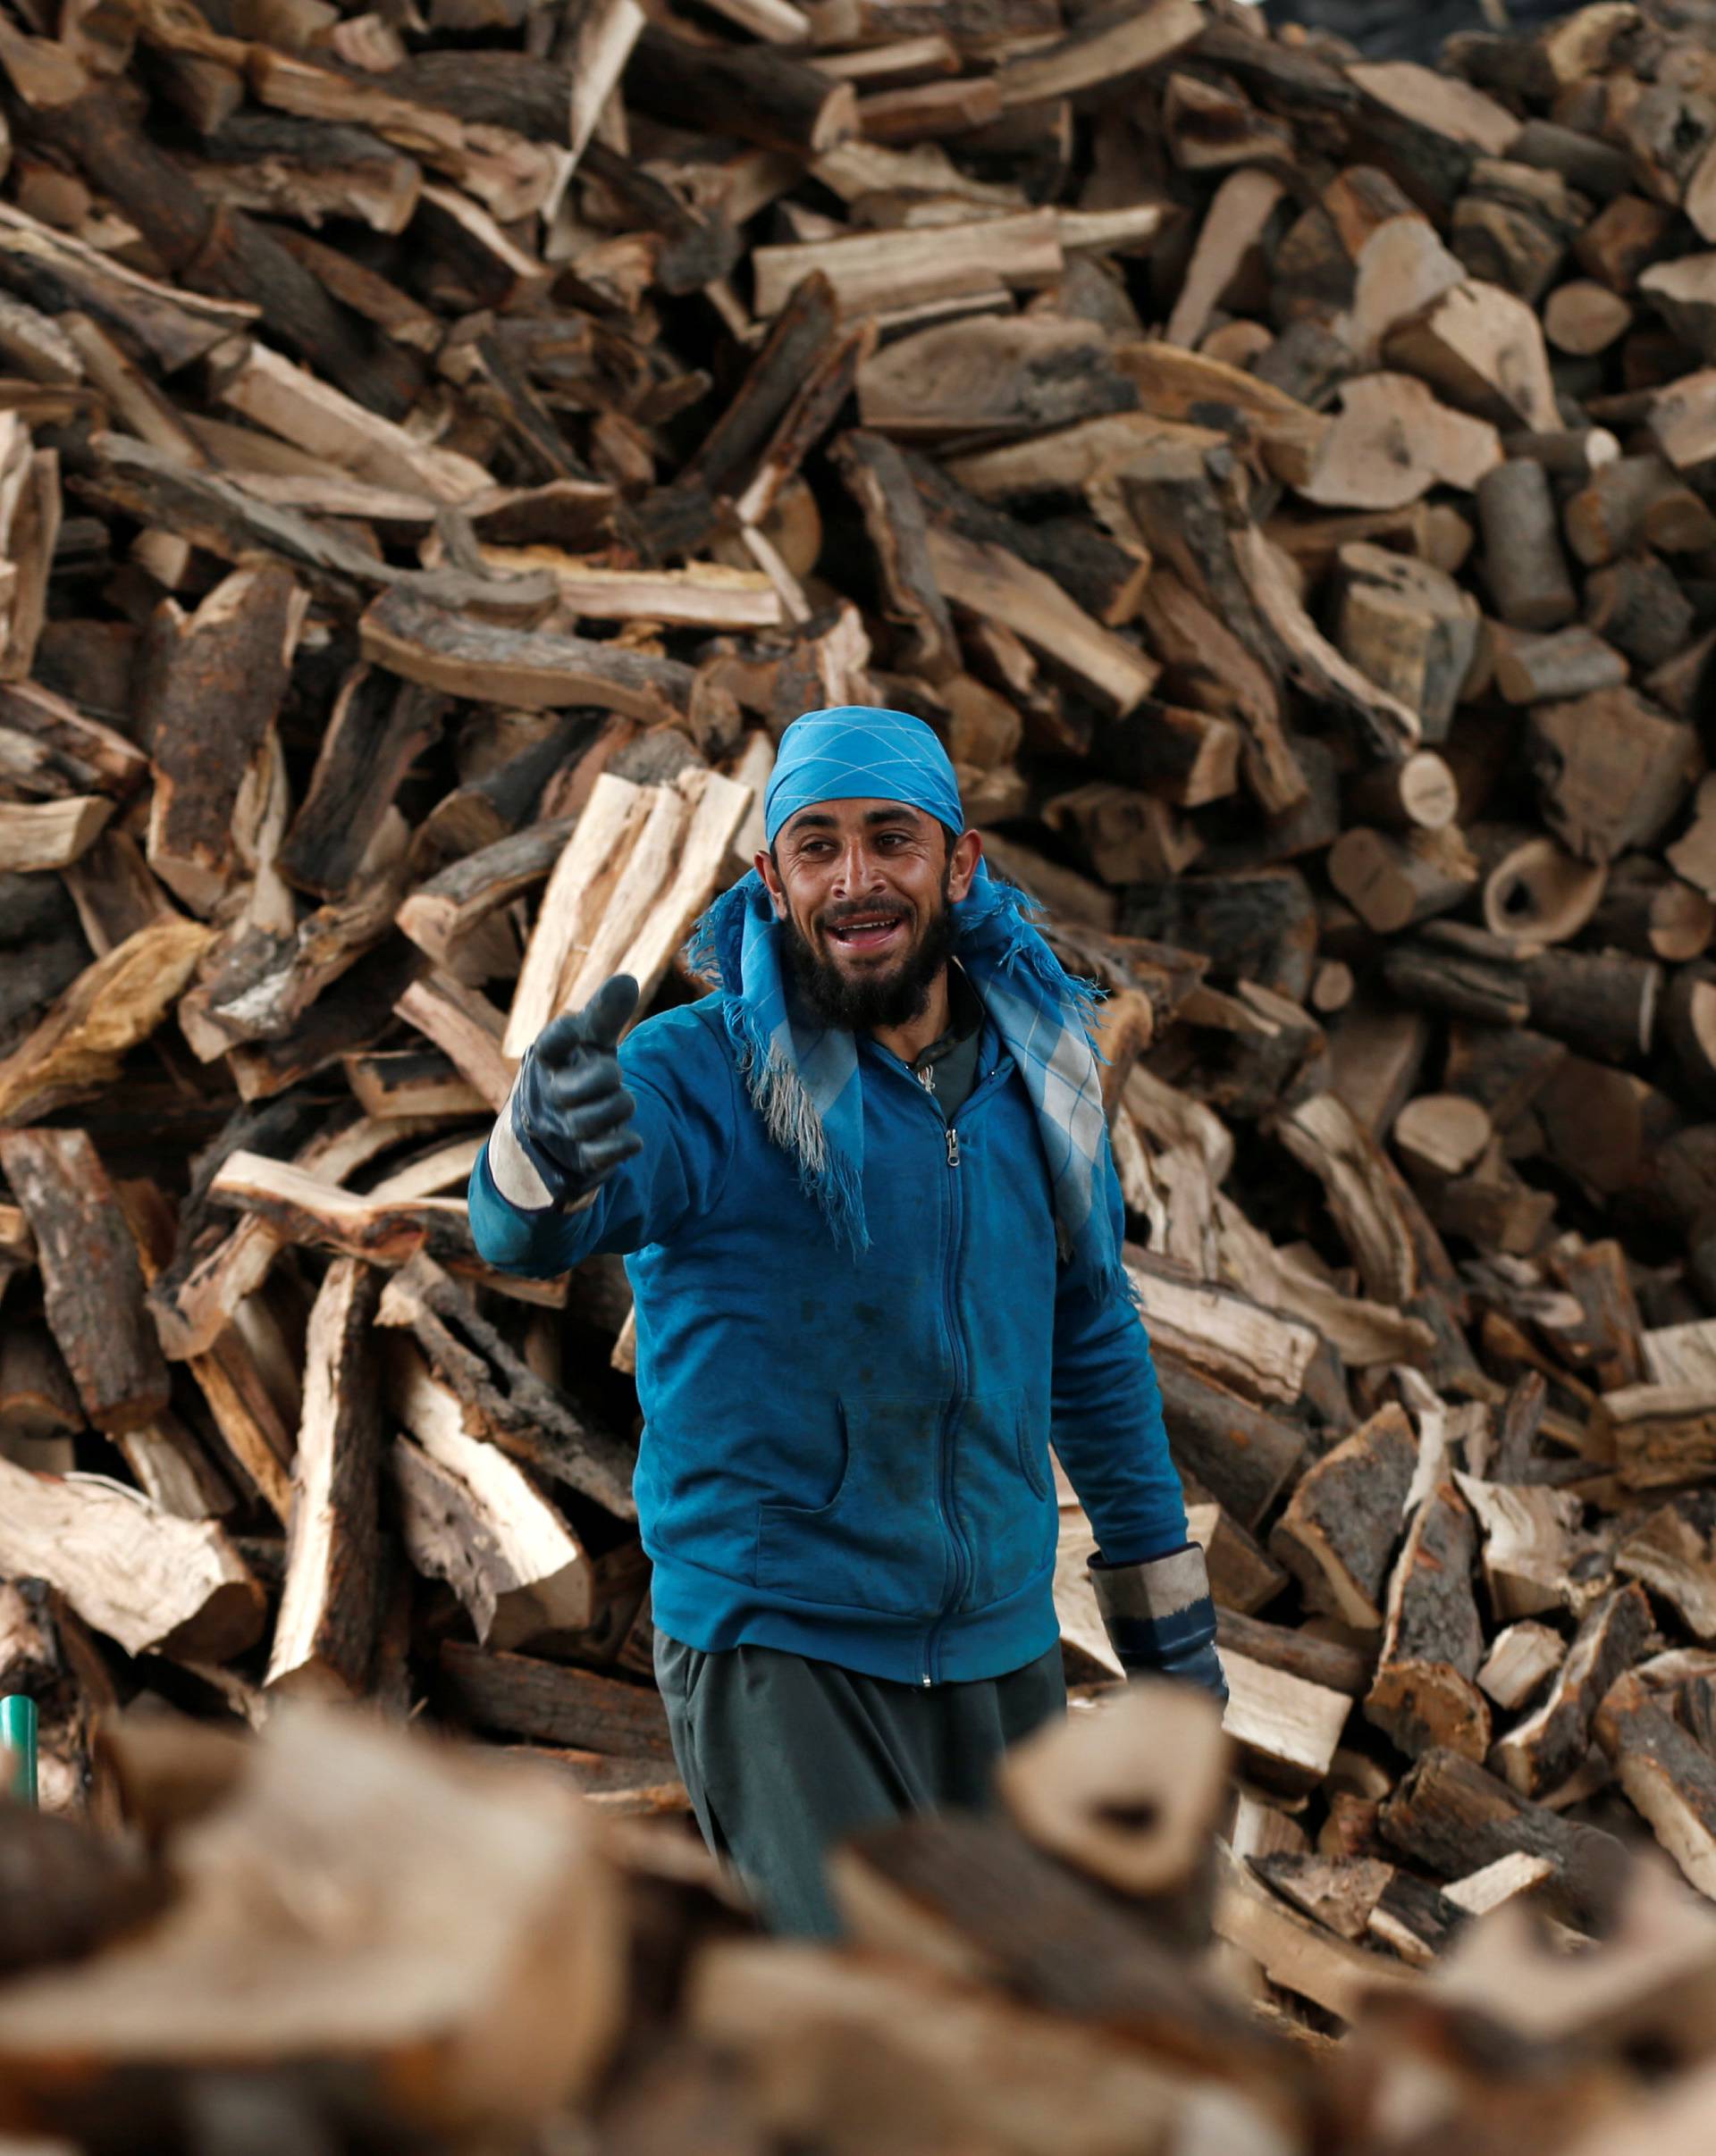 An Afghan man works at his firewood stall in Kabul, Afghanistan